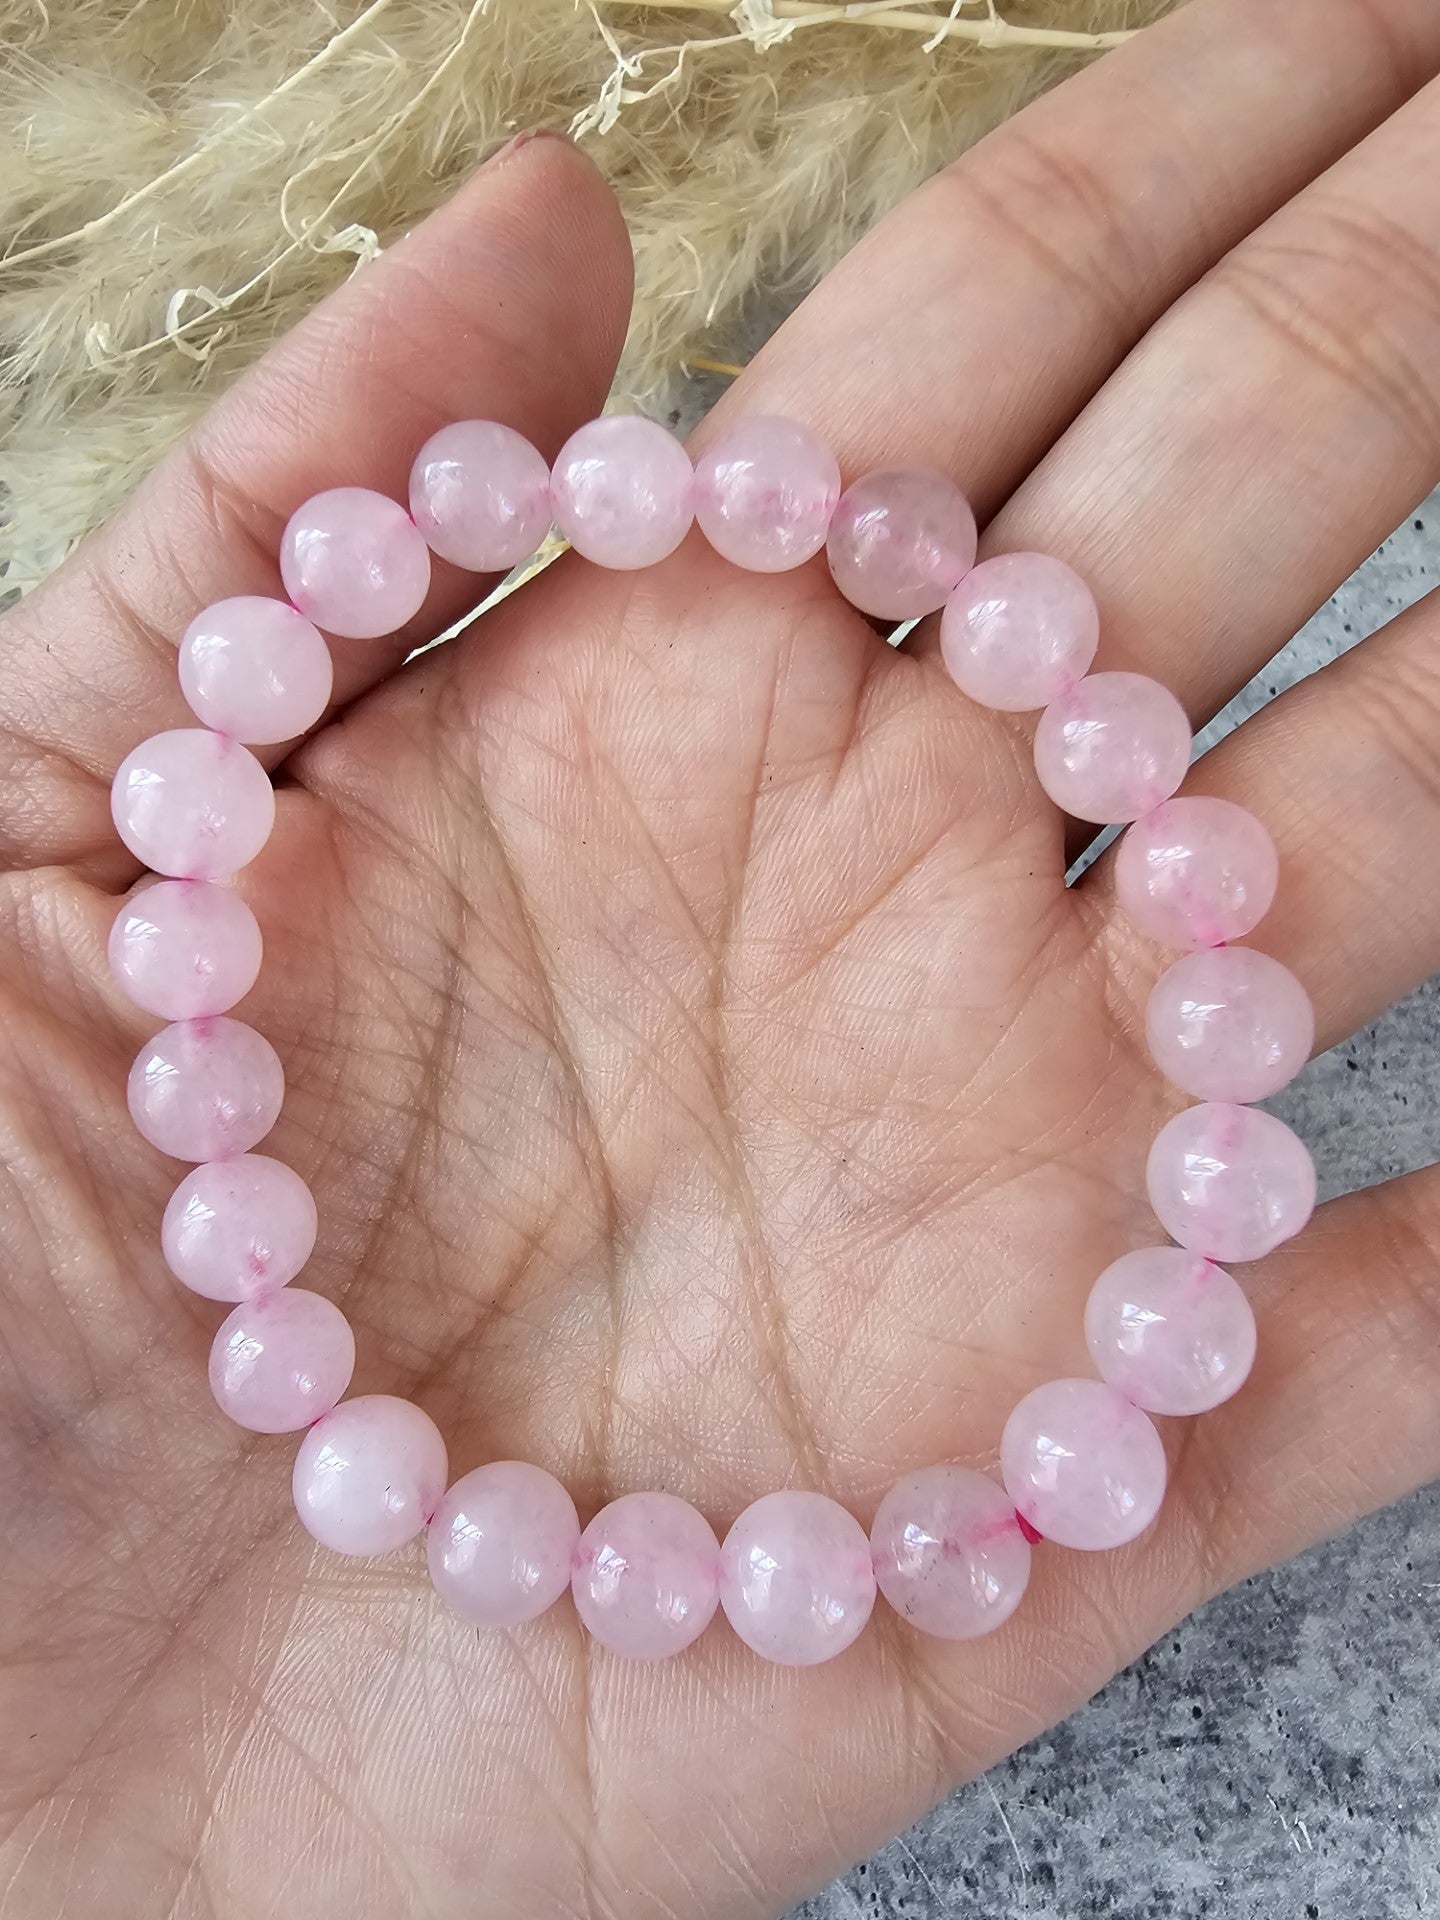 Rose quartz Round Bead Stretch Bracelet - Two Beads Sizes Available - Jewelry  from CirceBoutique